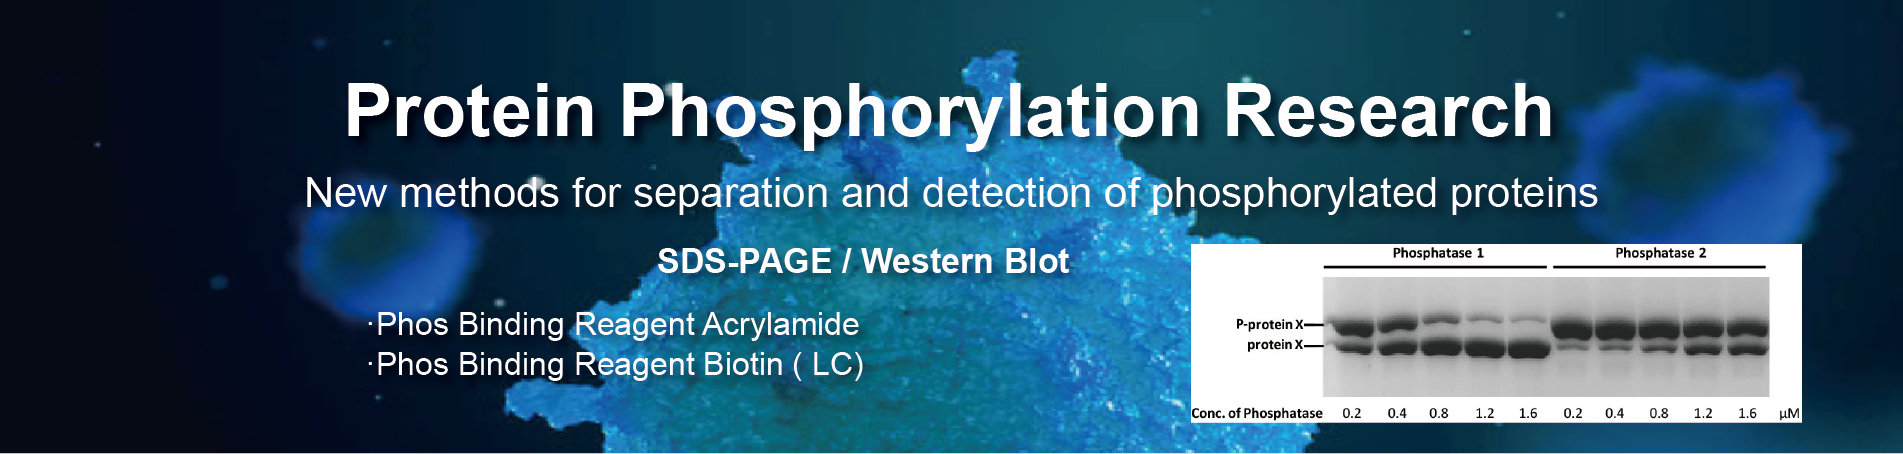 protein phosphorylation research